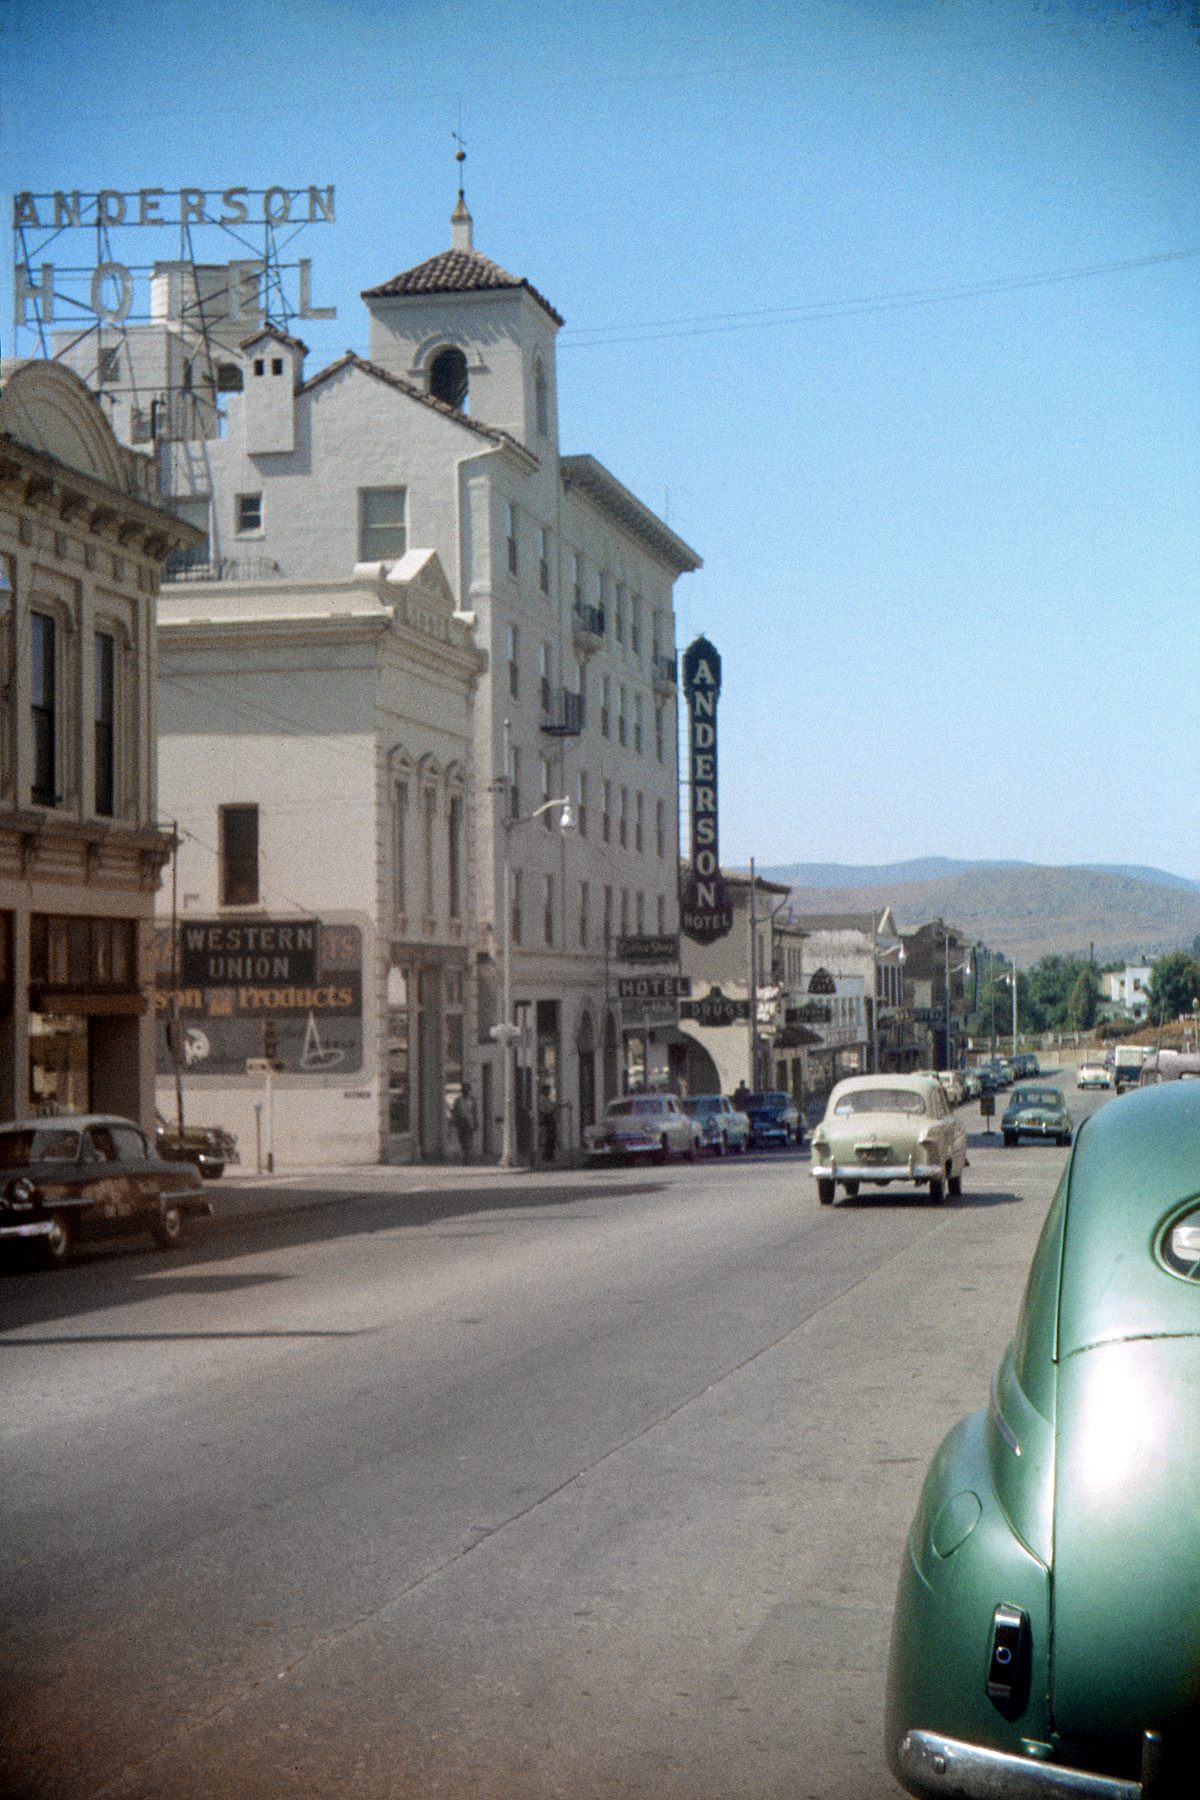 Summer 1955, San Luis Obispo, California. The days when old-looking buildings downtown really were old and Studebakers could roam the streets freely. My brother's Anscochome slide. View full size.